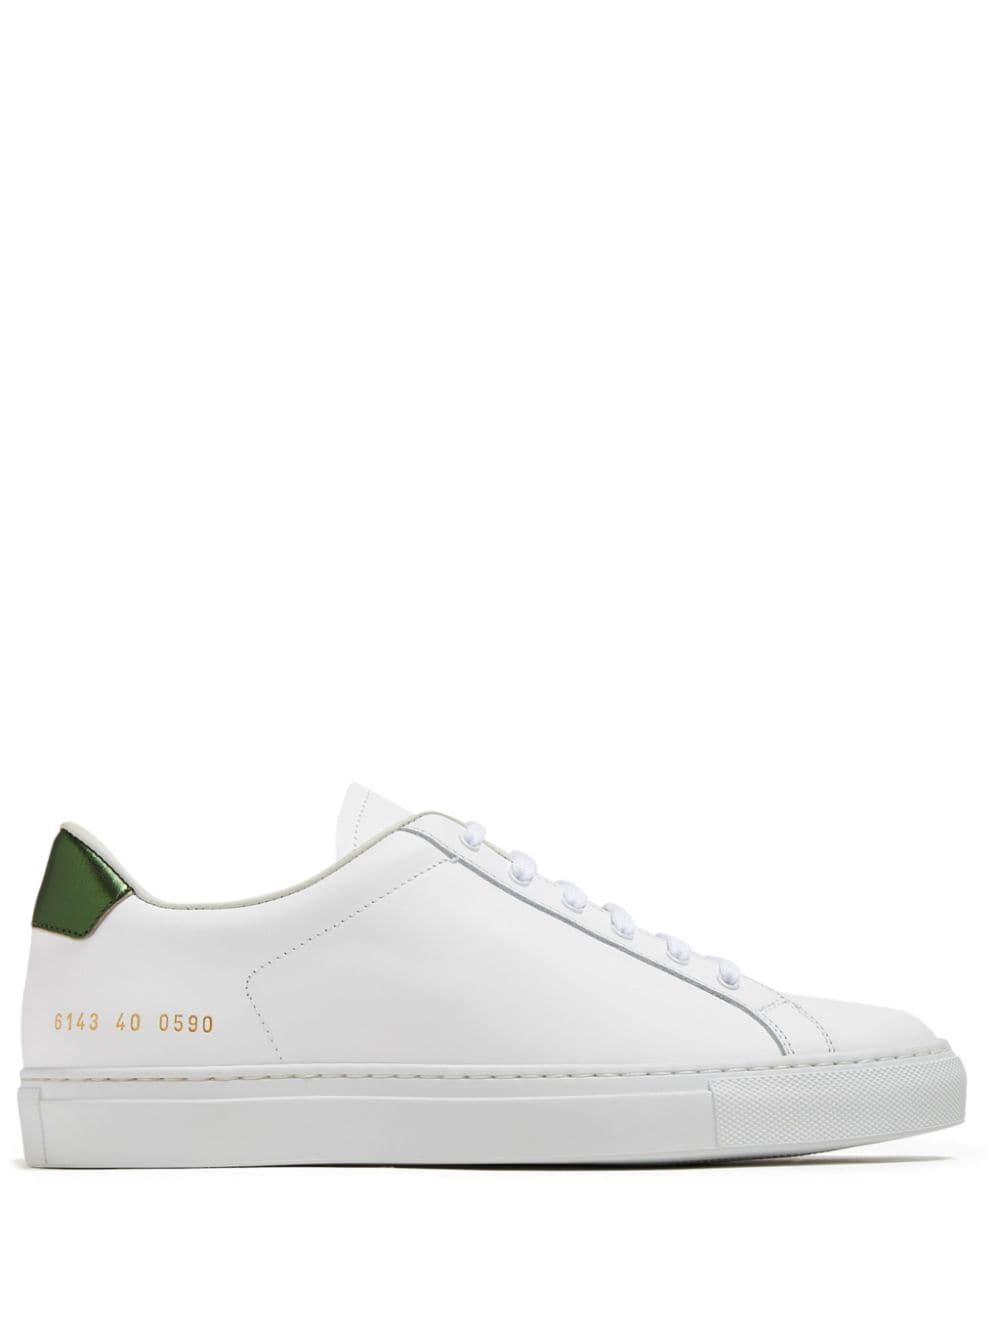 Common Projects Retro Classics logo-stamp leather sneakers - White von Common Projects